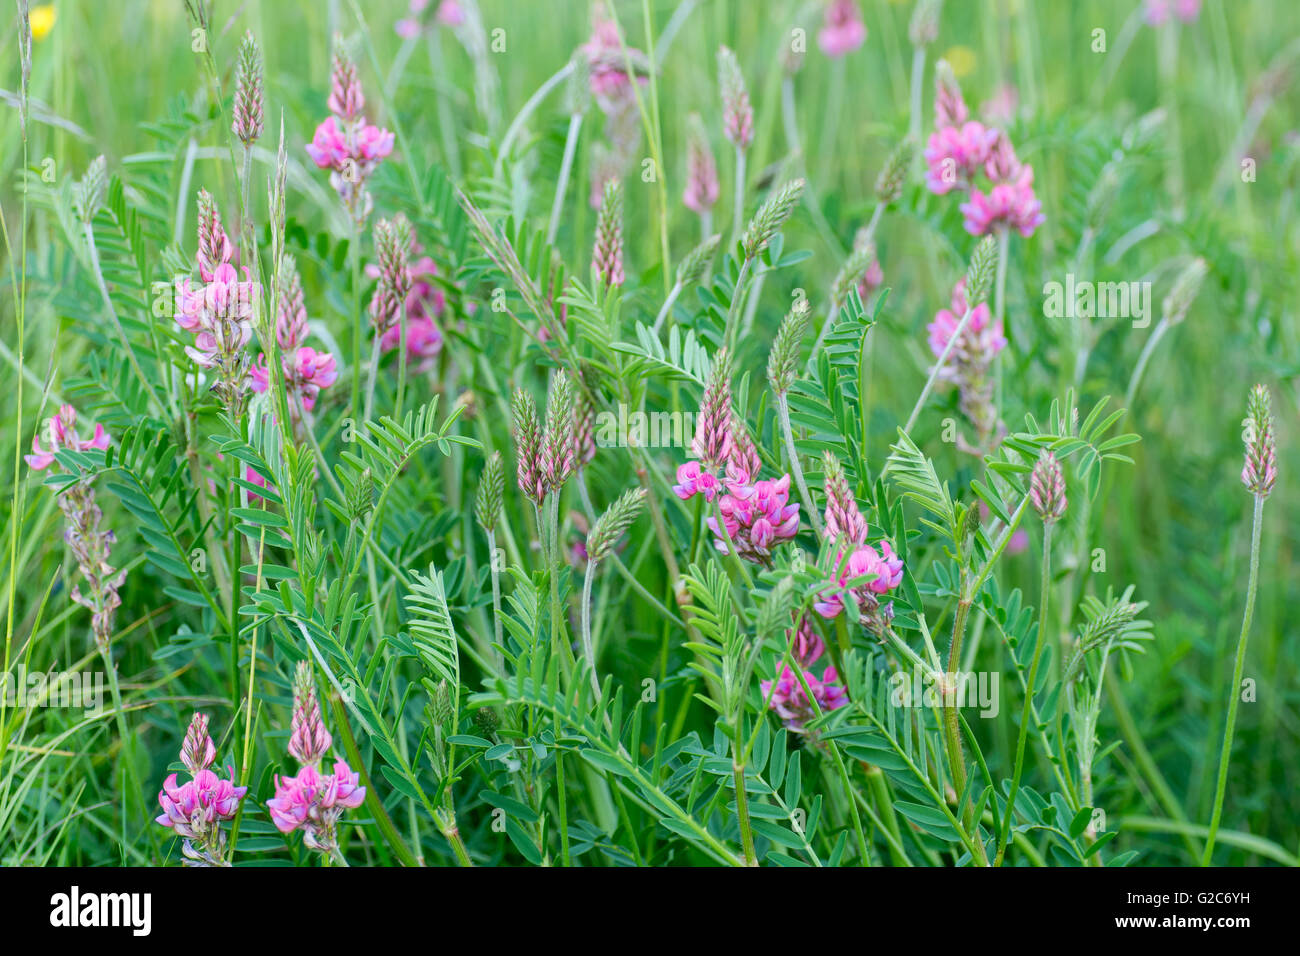 Sainfoin (Onobrychis viciifolia) plant in flower. Pink flowers with purple veins on plant in the family Fabaceae, the pea family Stock Photo